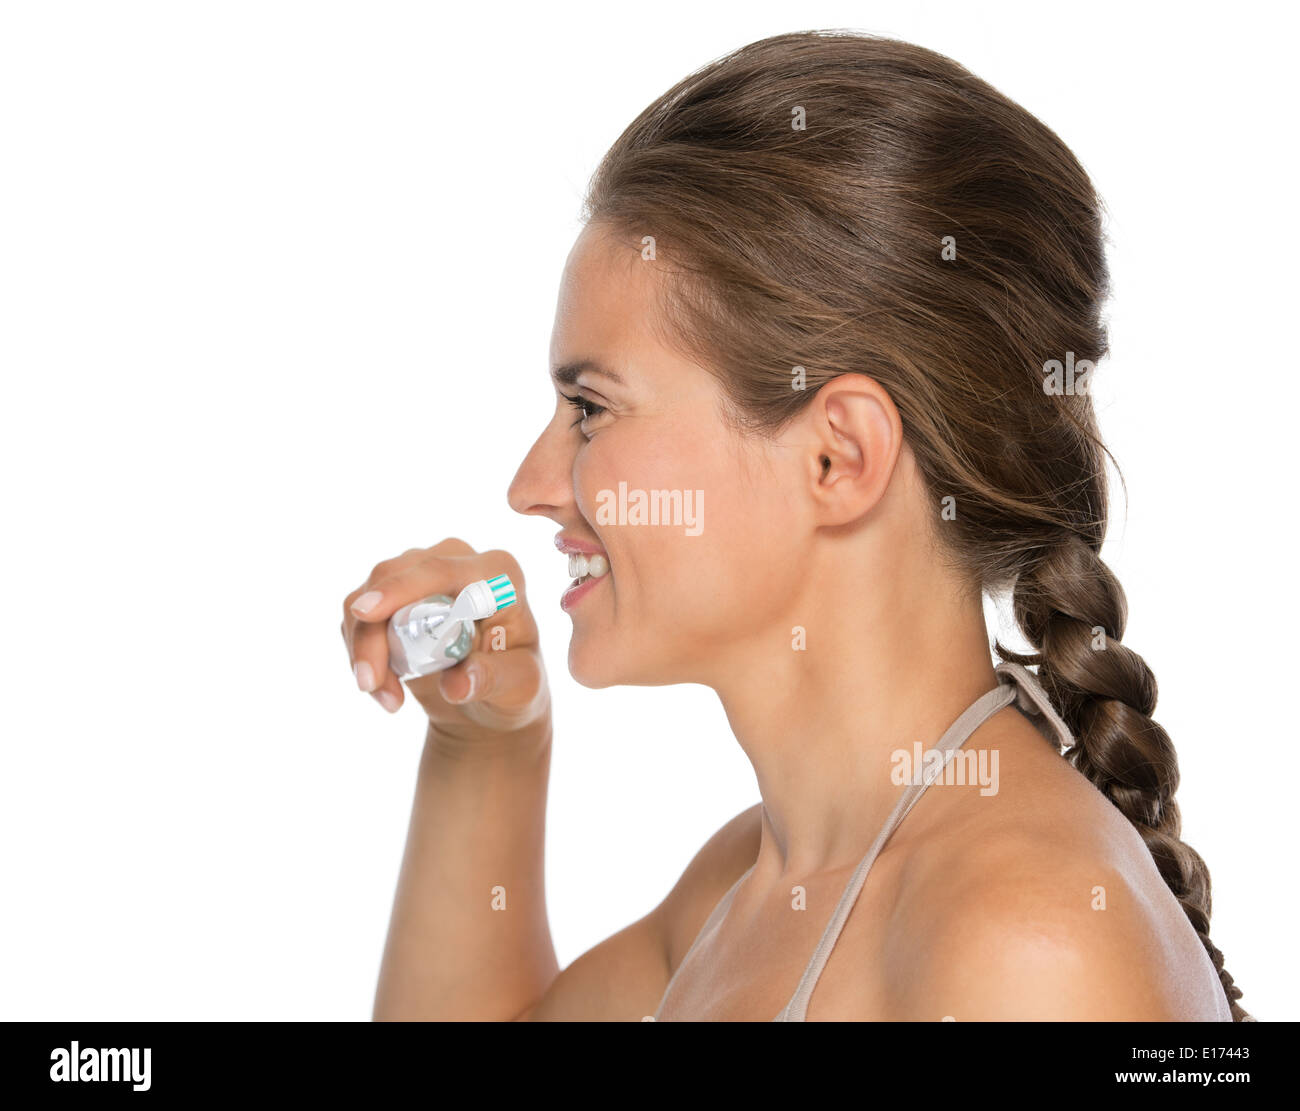 Profile portrait of young woman brushing teeth Stock Photo